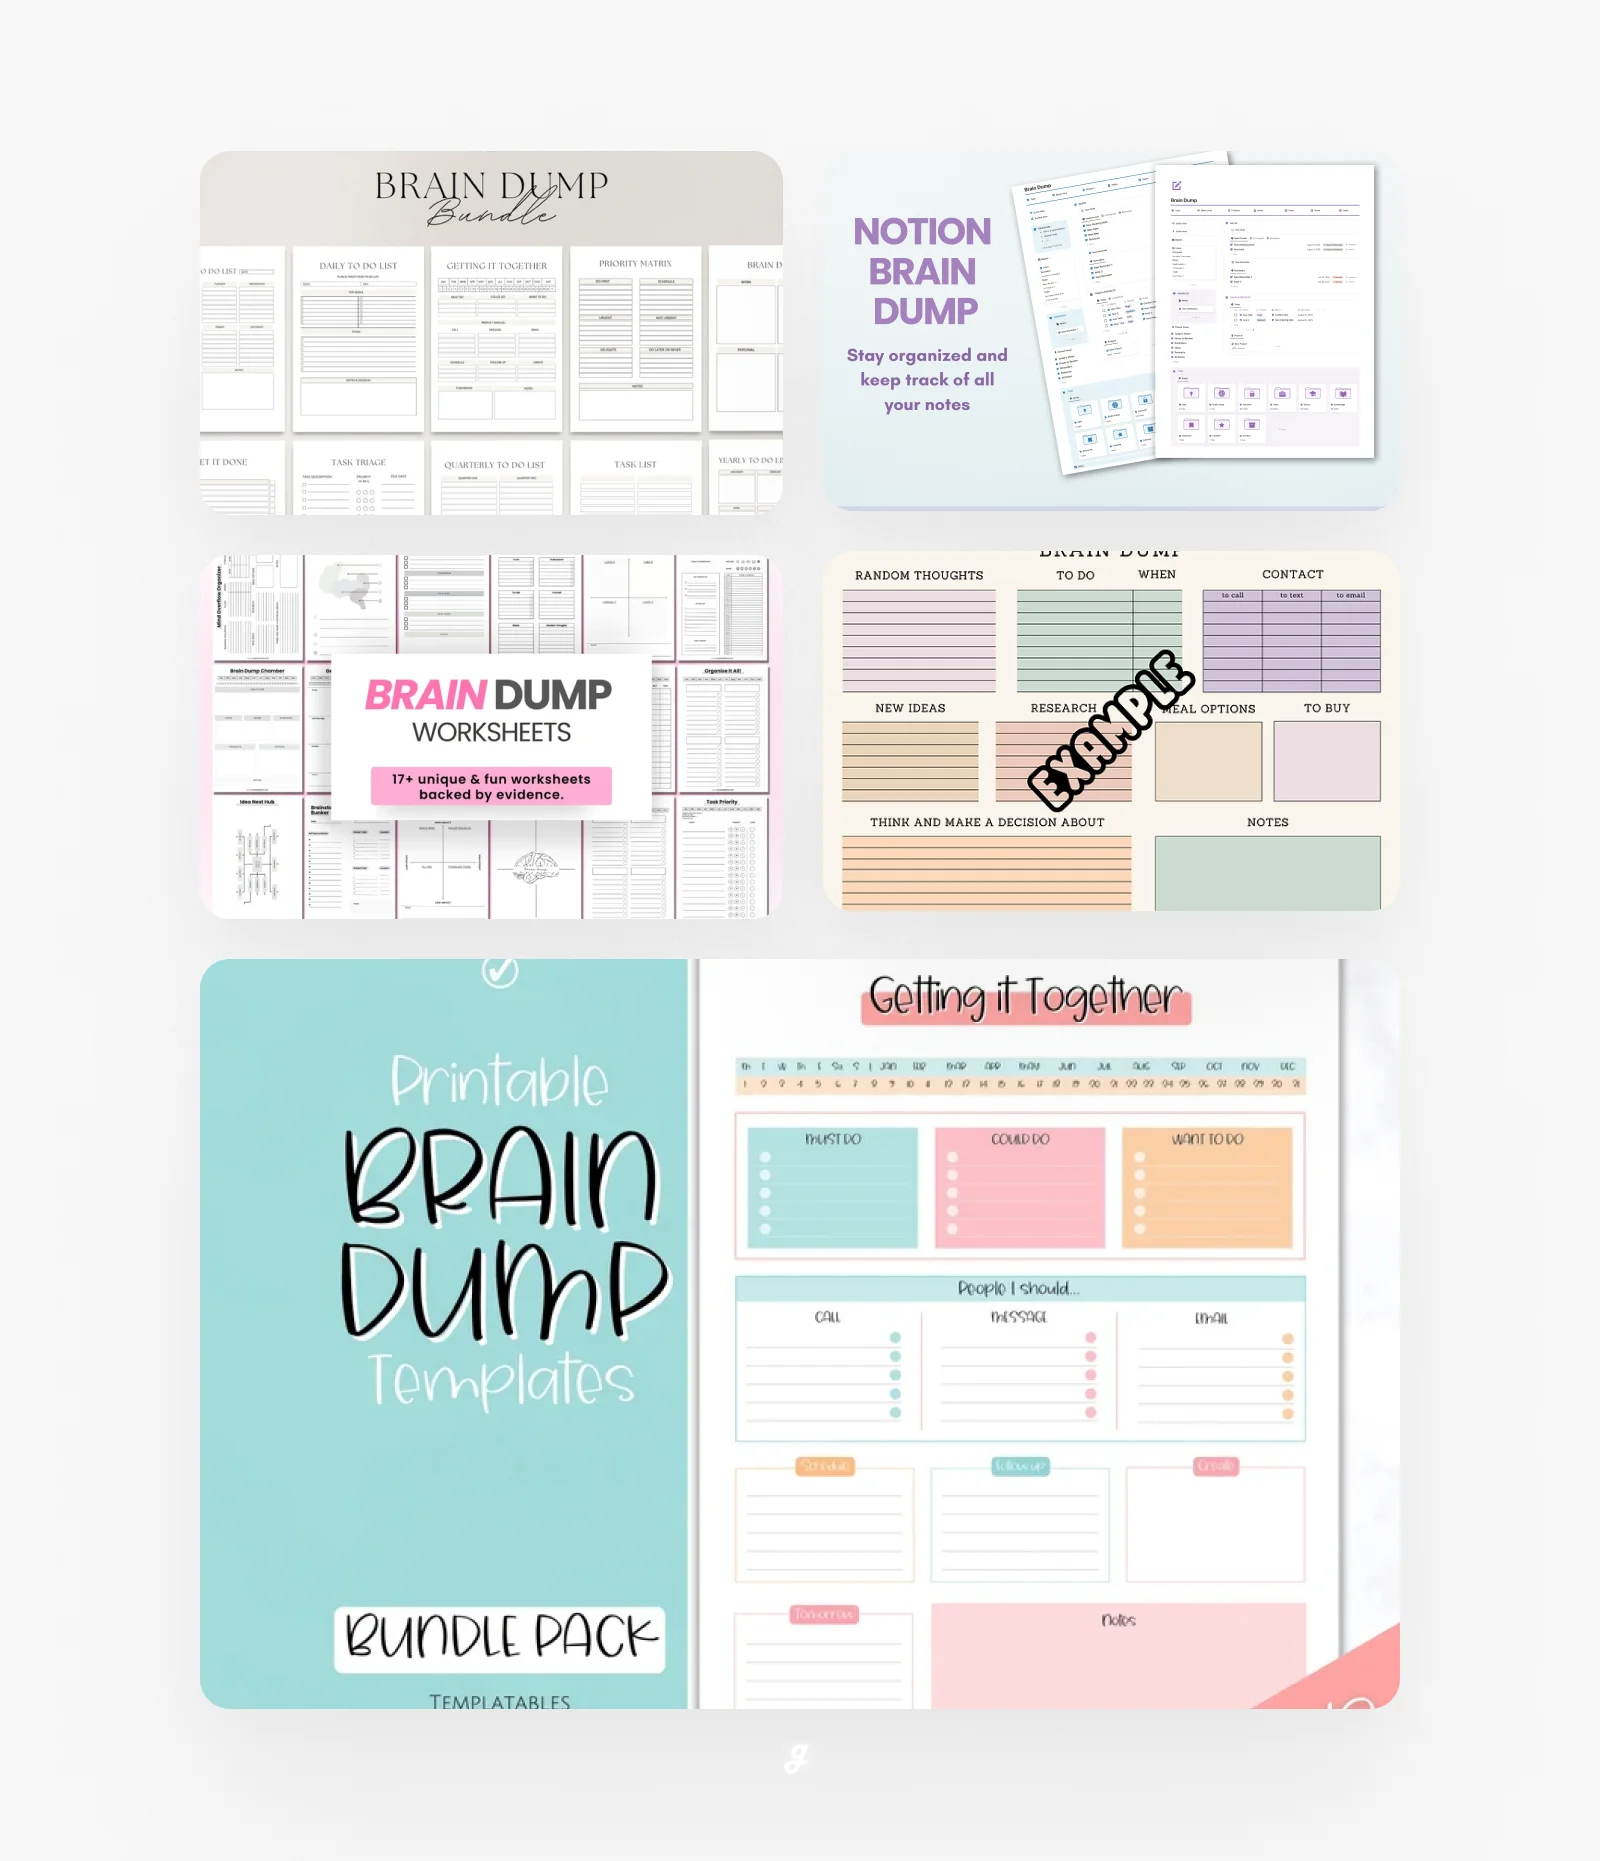 20+ Brain Dump Worksheets & Templates to Boost Your Ideas